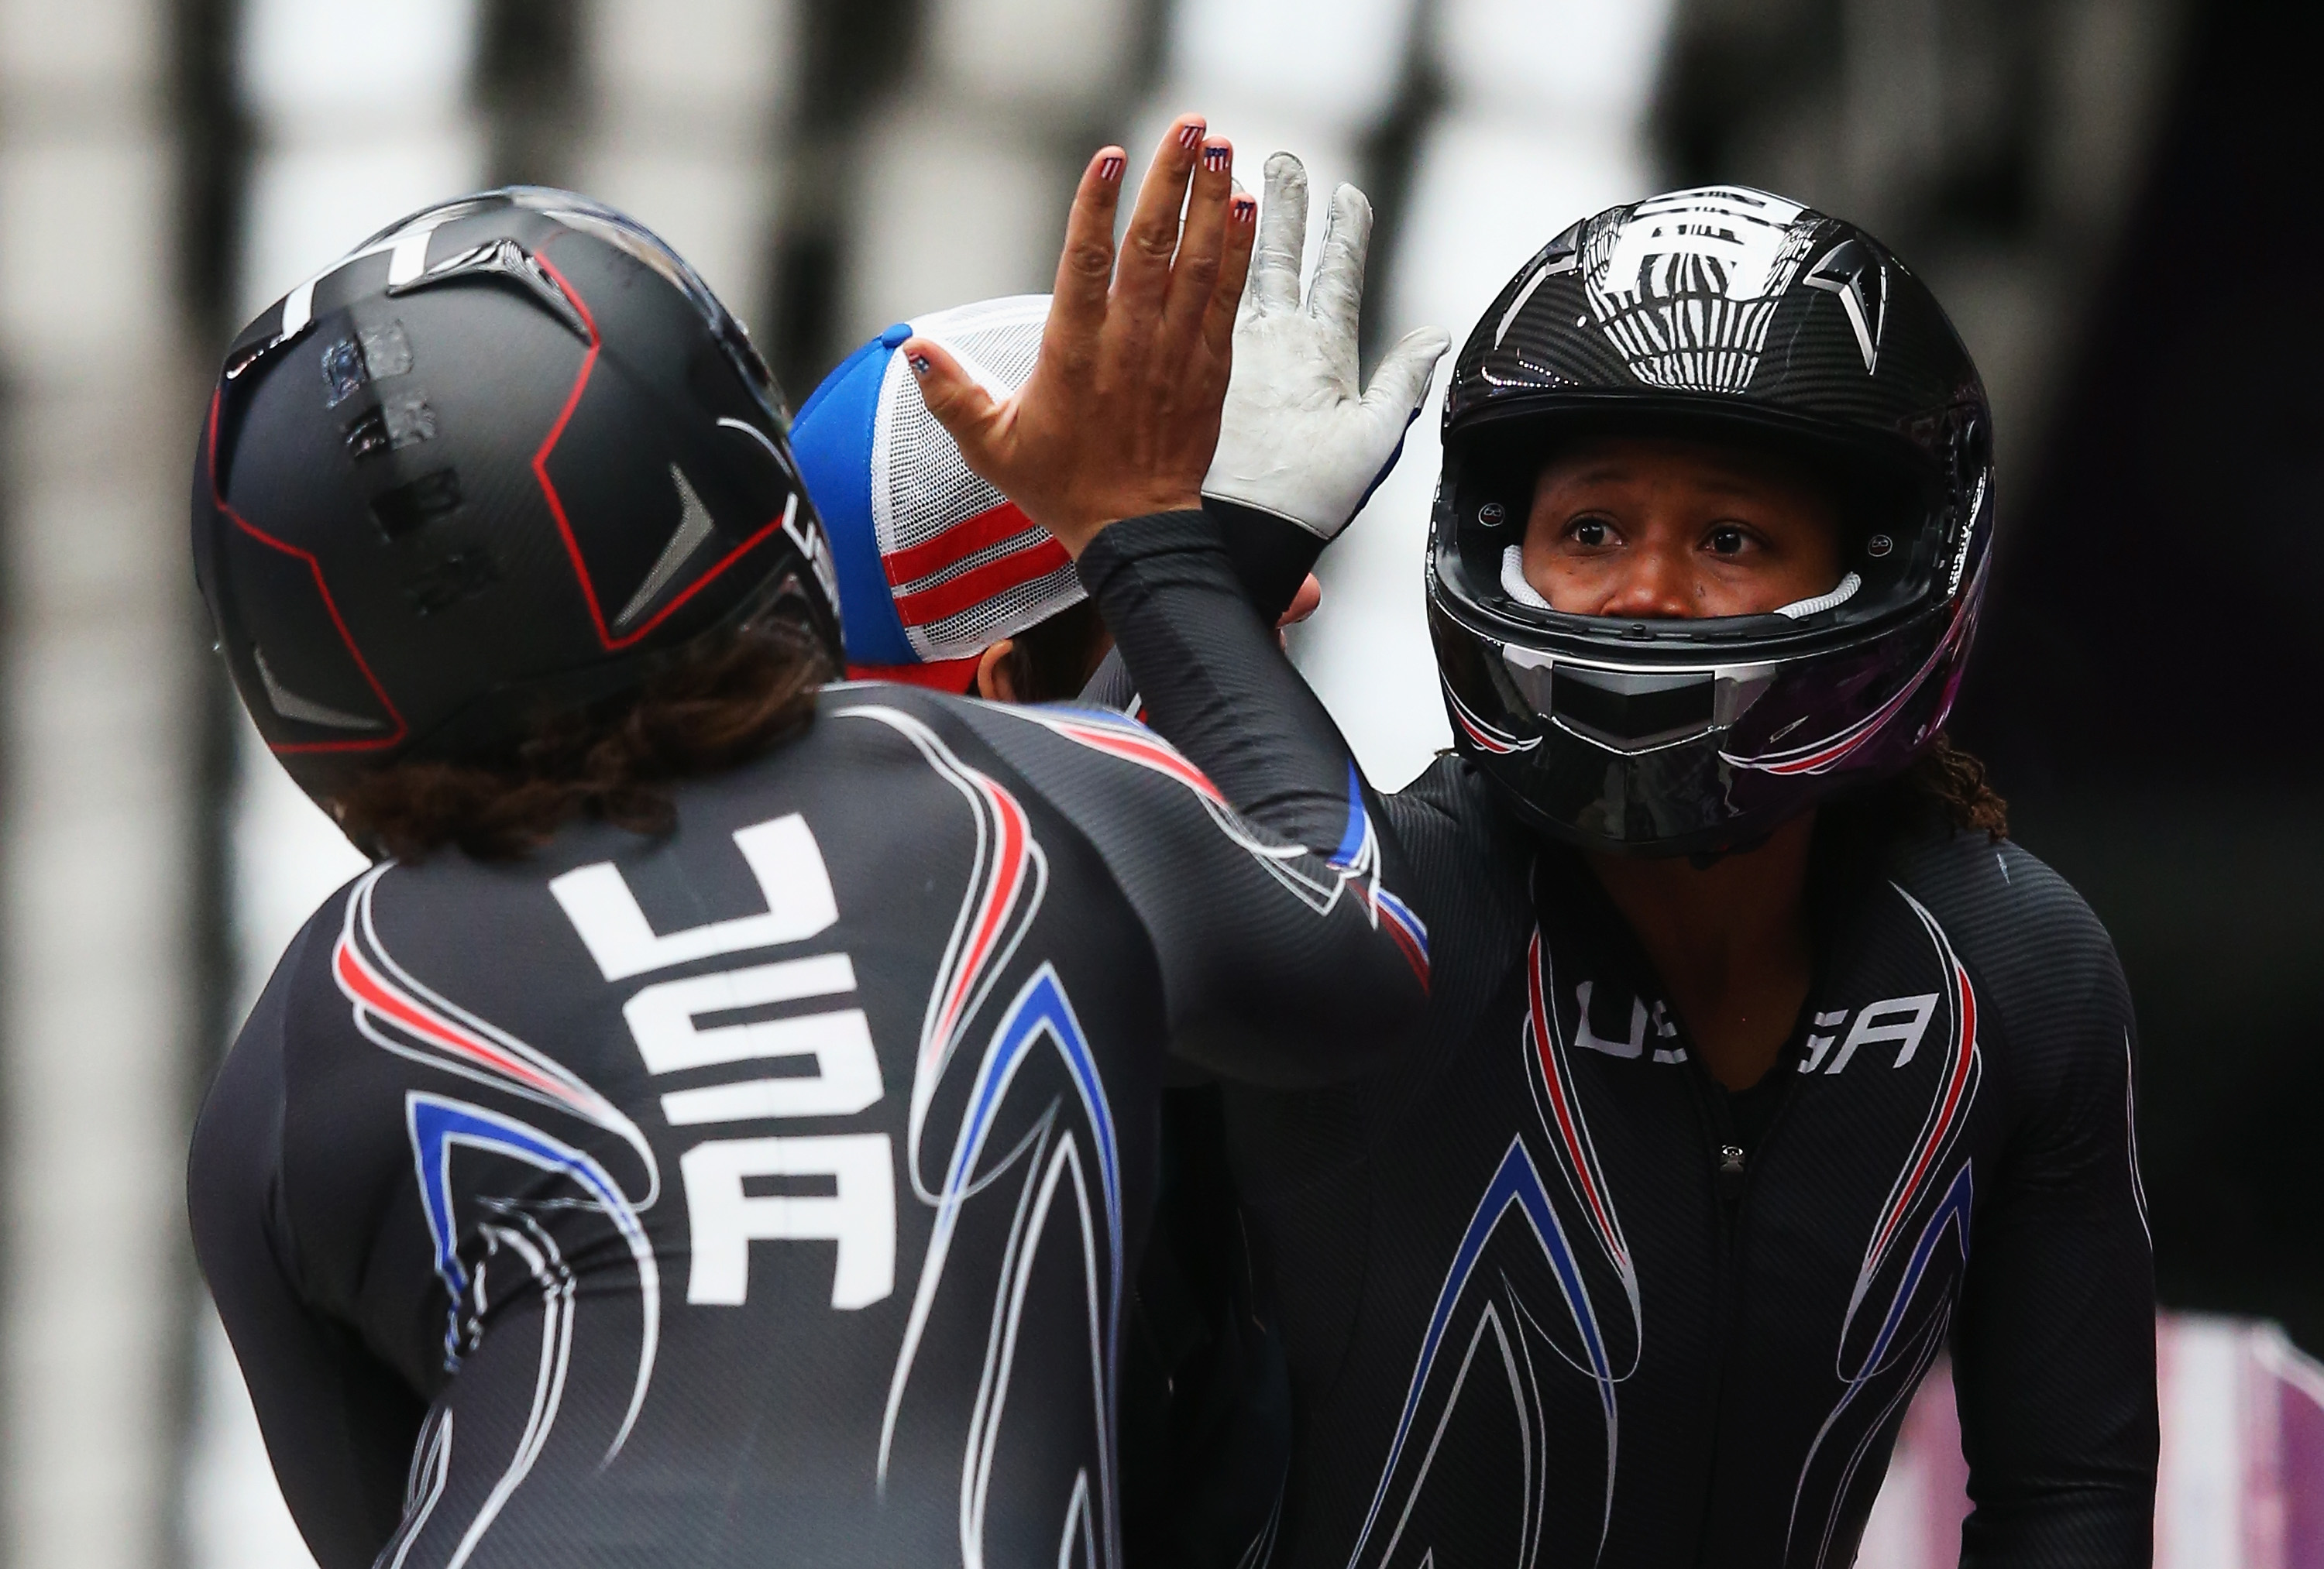 Elana Meyers (left) and Lauryn Williams of the United States team 1 celebrate during the Women's Bobsleigh at the Sochi 2014 Winter Olympics in Russia. Alex Livesey—Getty Images (Alex Livesey—Getty Images)